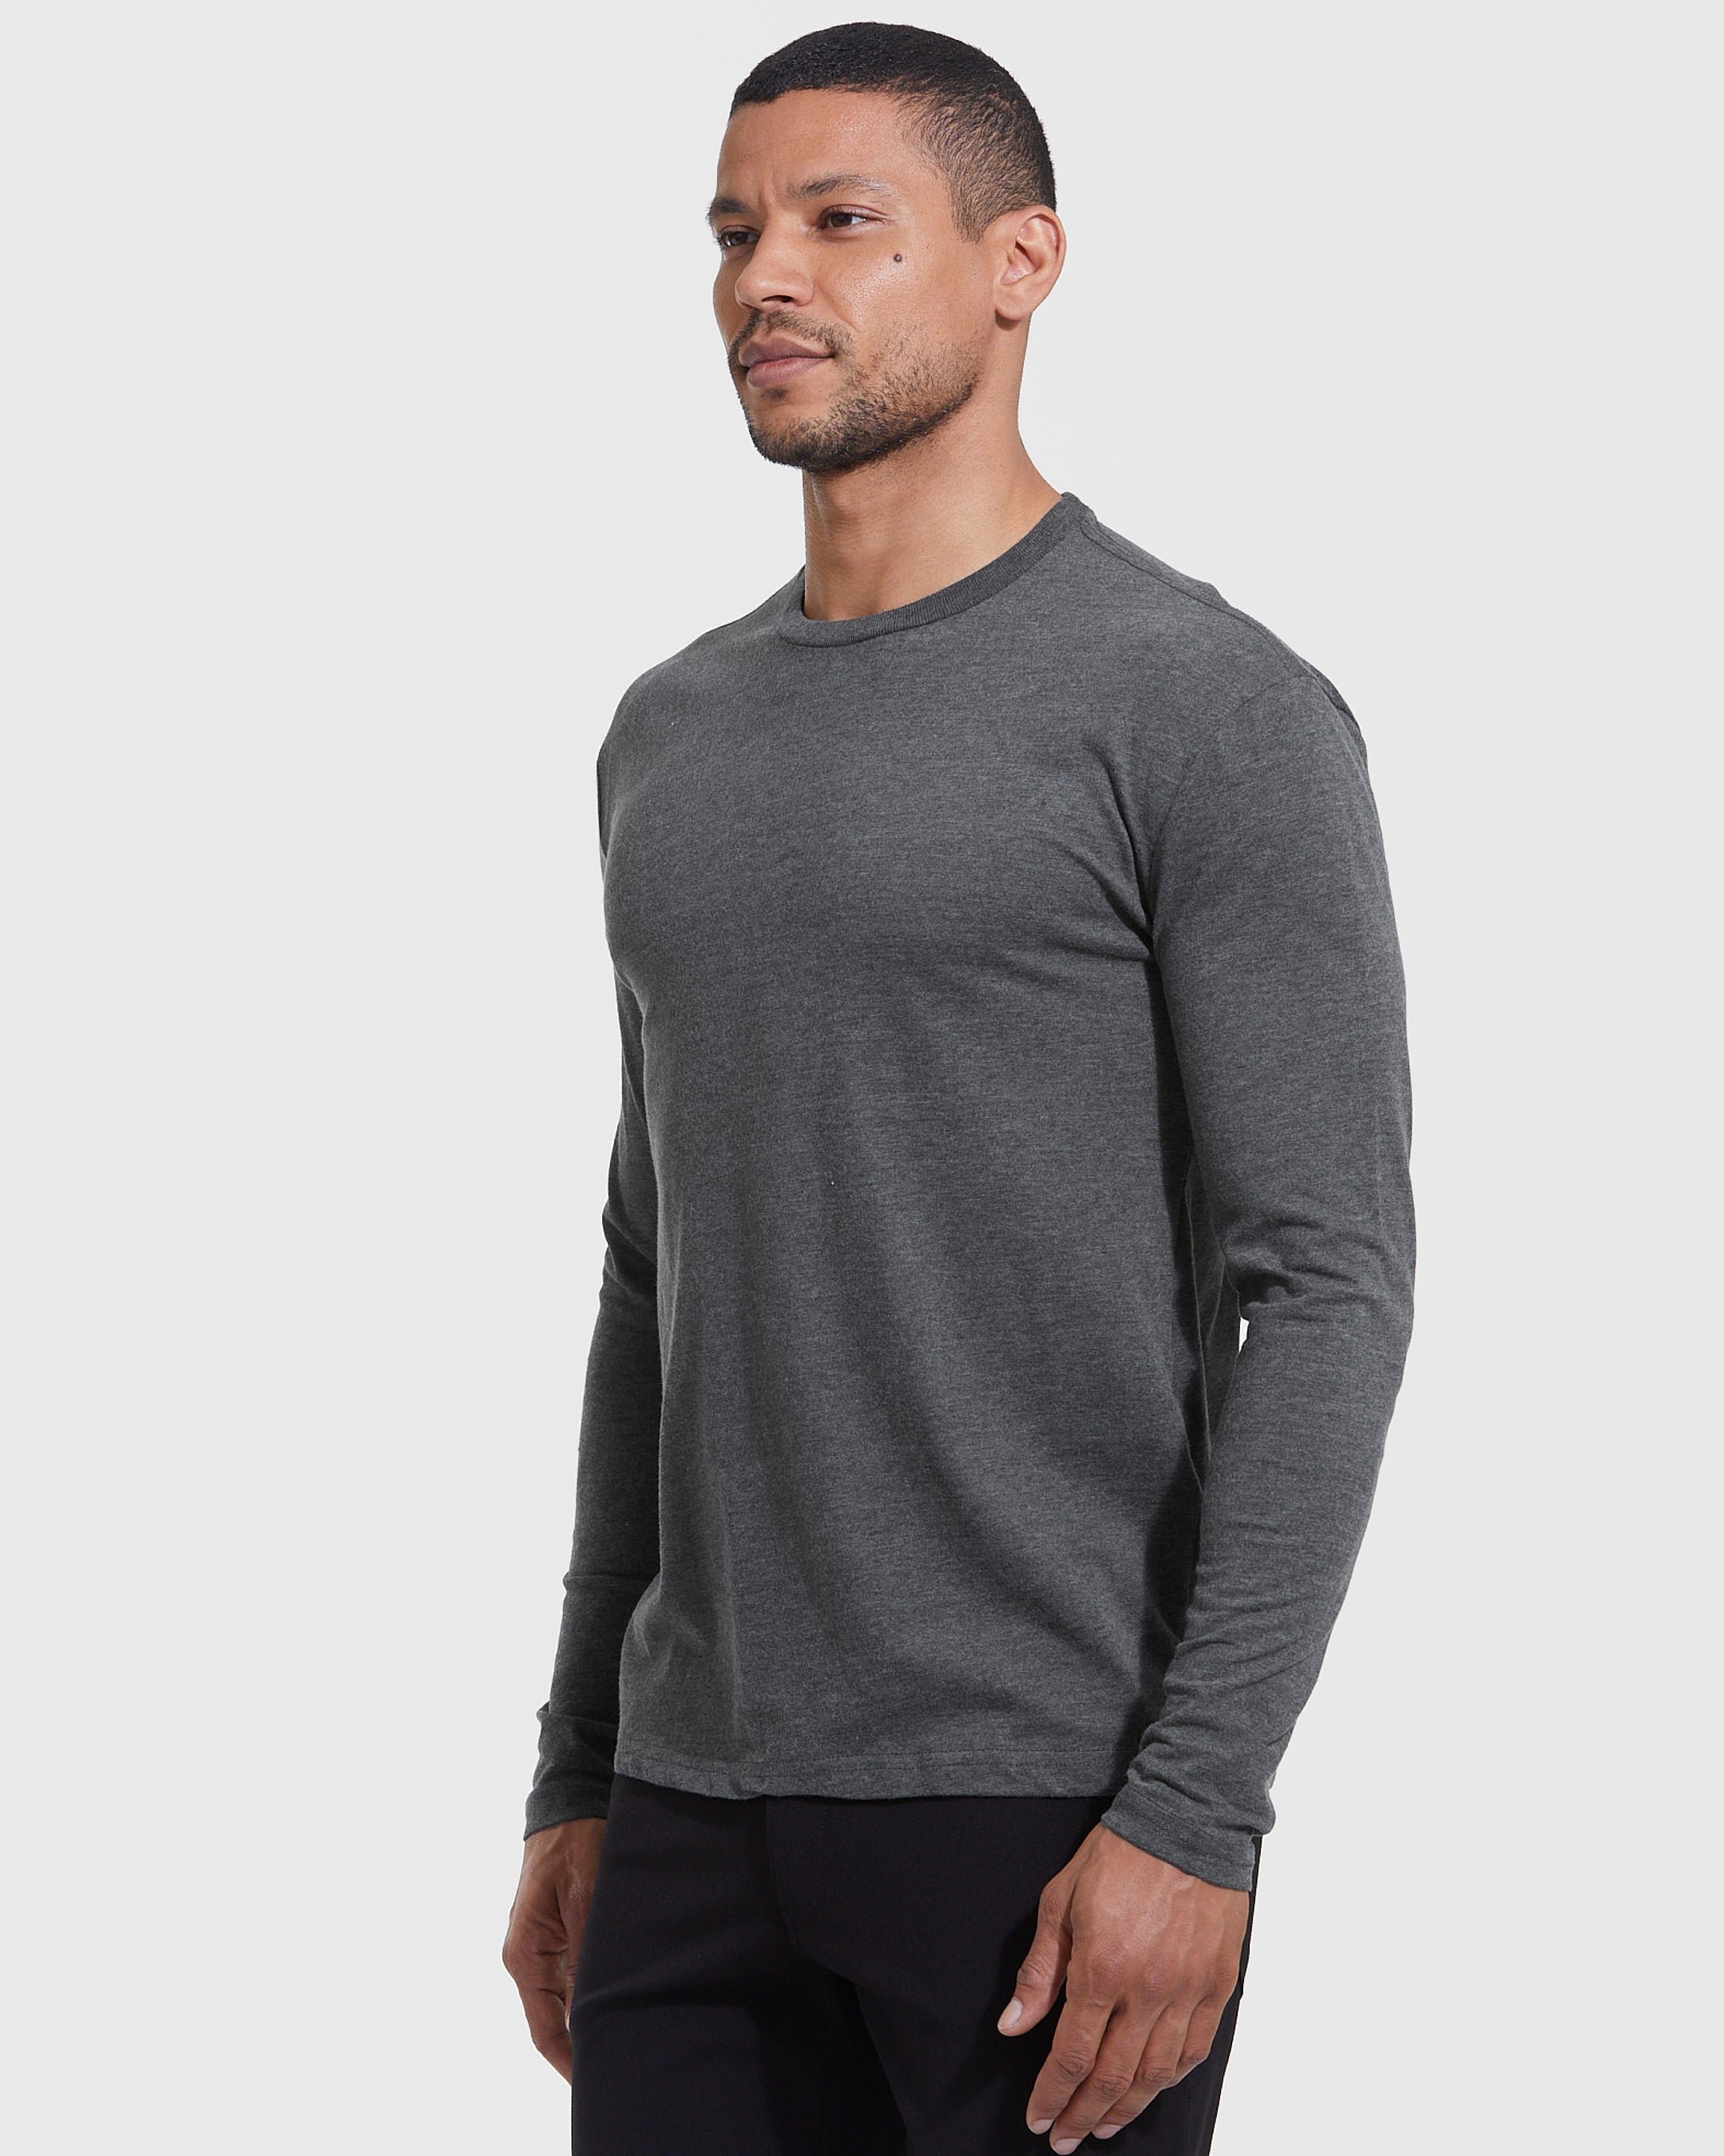 The Heather Grays Long Sleeve Crew Neck 3-Pack